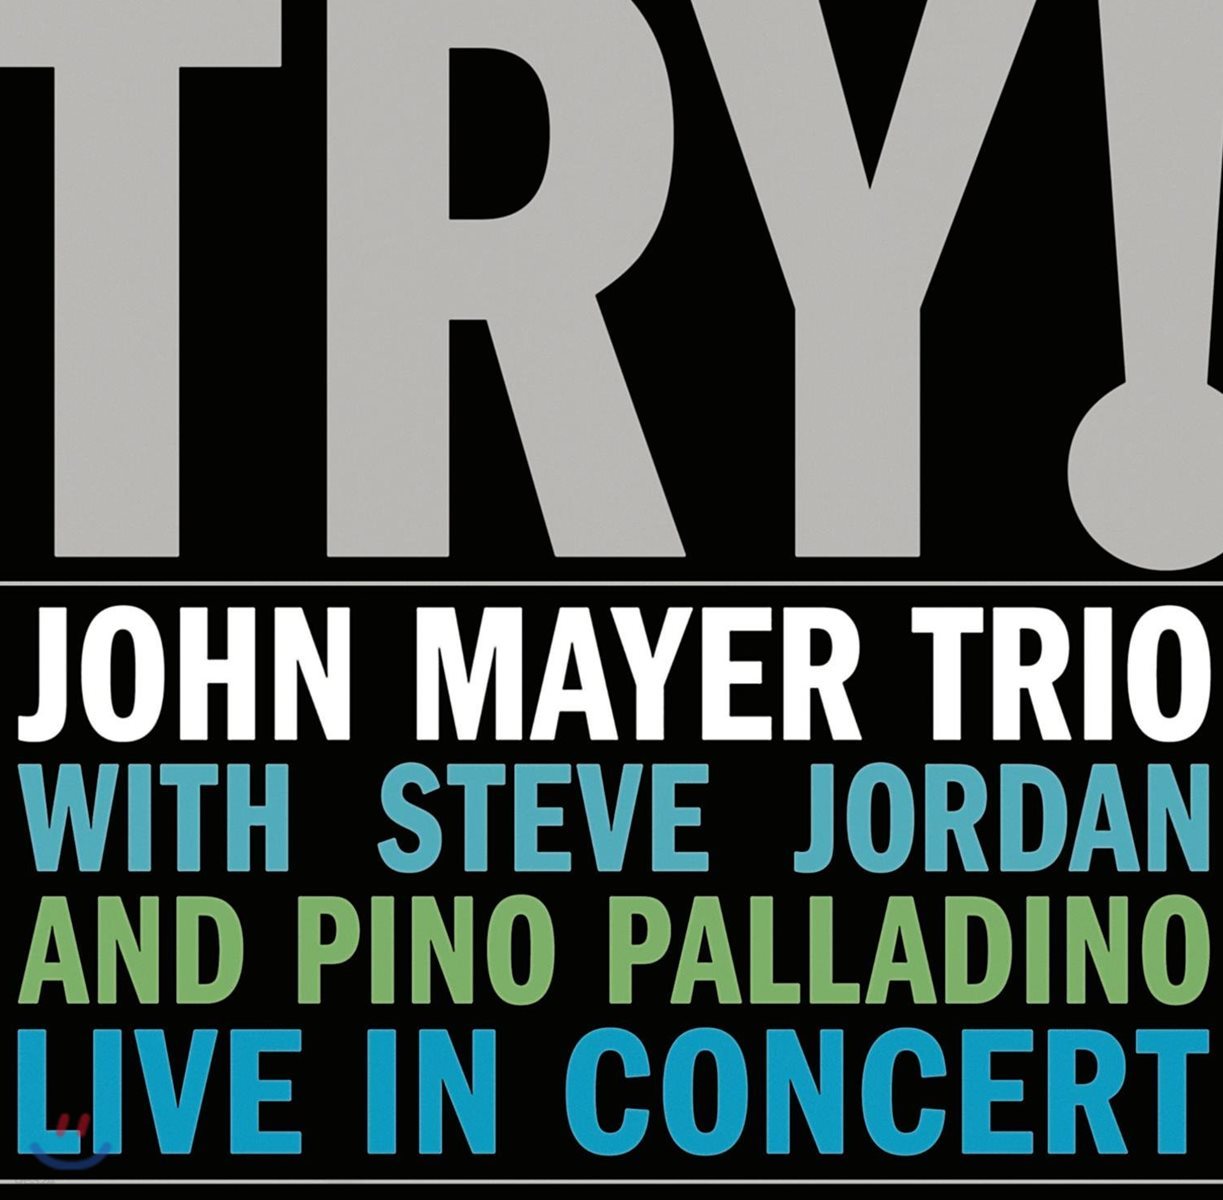 John Mayer Trio (존 메이어 트리오) - Try!: Live in Concert